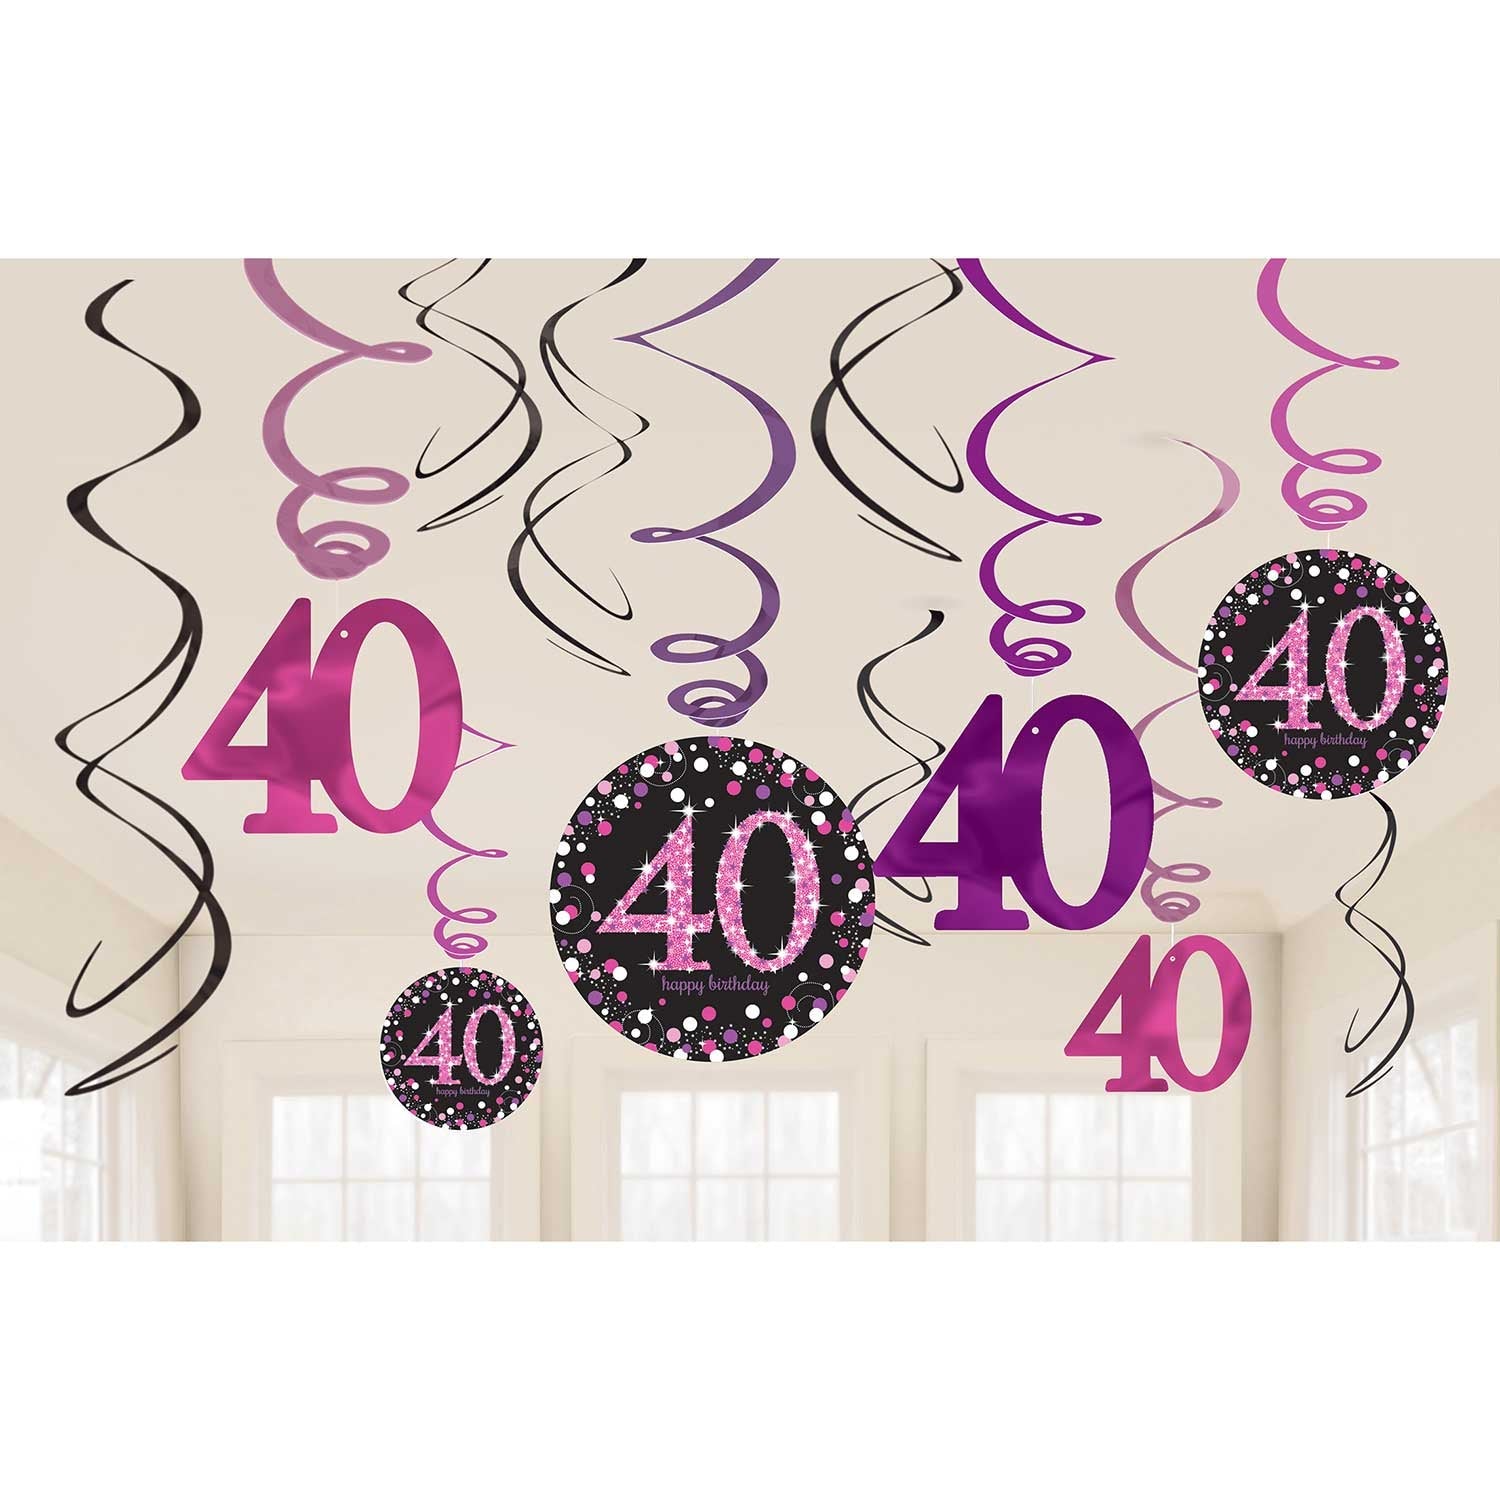 Pink Celebration 40th Swirl Decorations . Contains 6 Foil Swirls 45cm, 3 Swirls 60cm with Card Numbers, 3 Foil Swirls 60cm with Foil Numbers